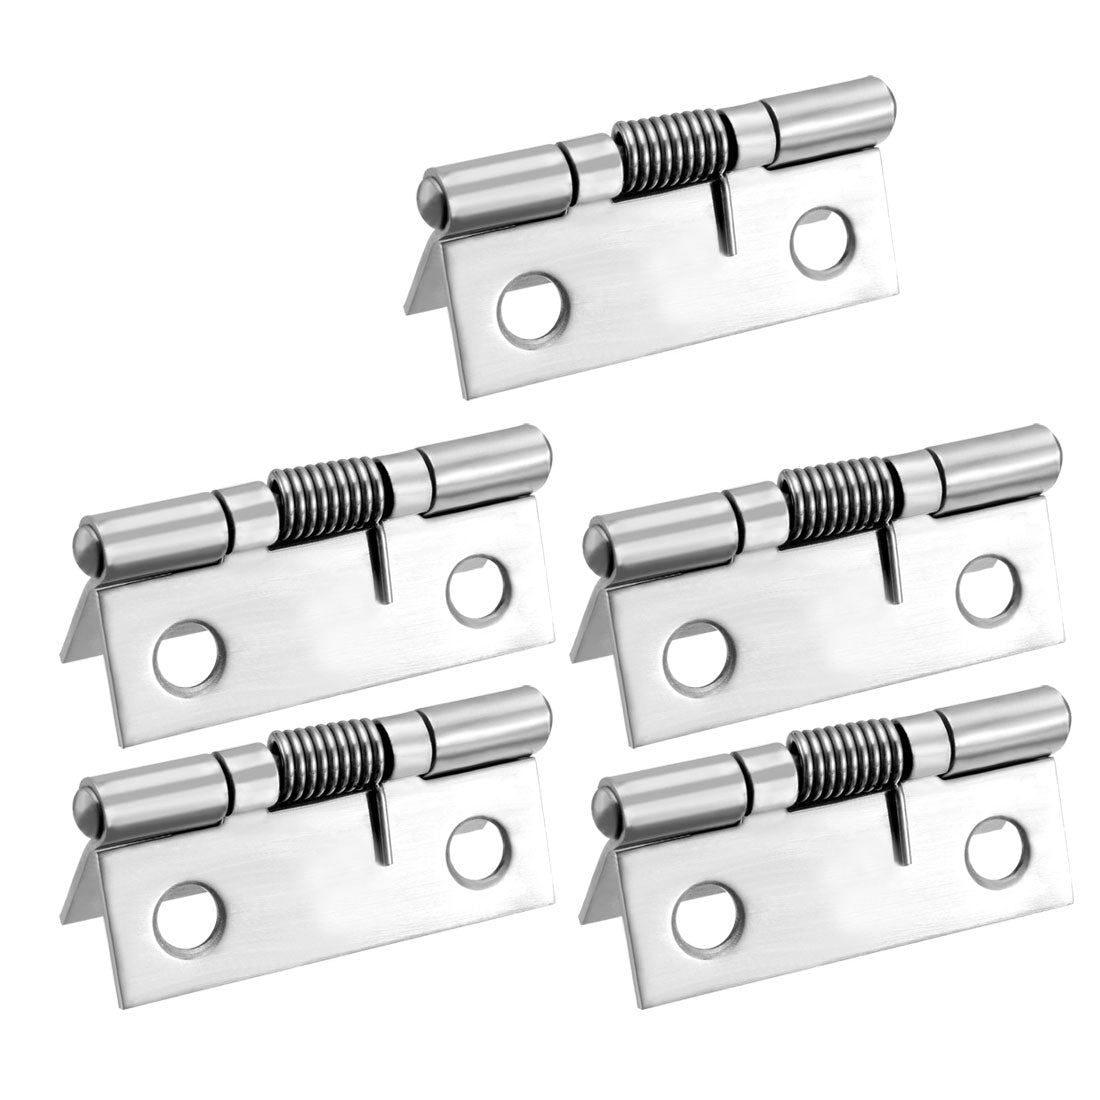 uxcell Uxcell Self Closing Spring Hinge 1.5" Stainless Steel Brushed DIY Hardware for Door Cabinet Small Box 5pcs per Pack